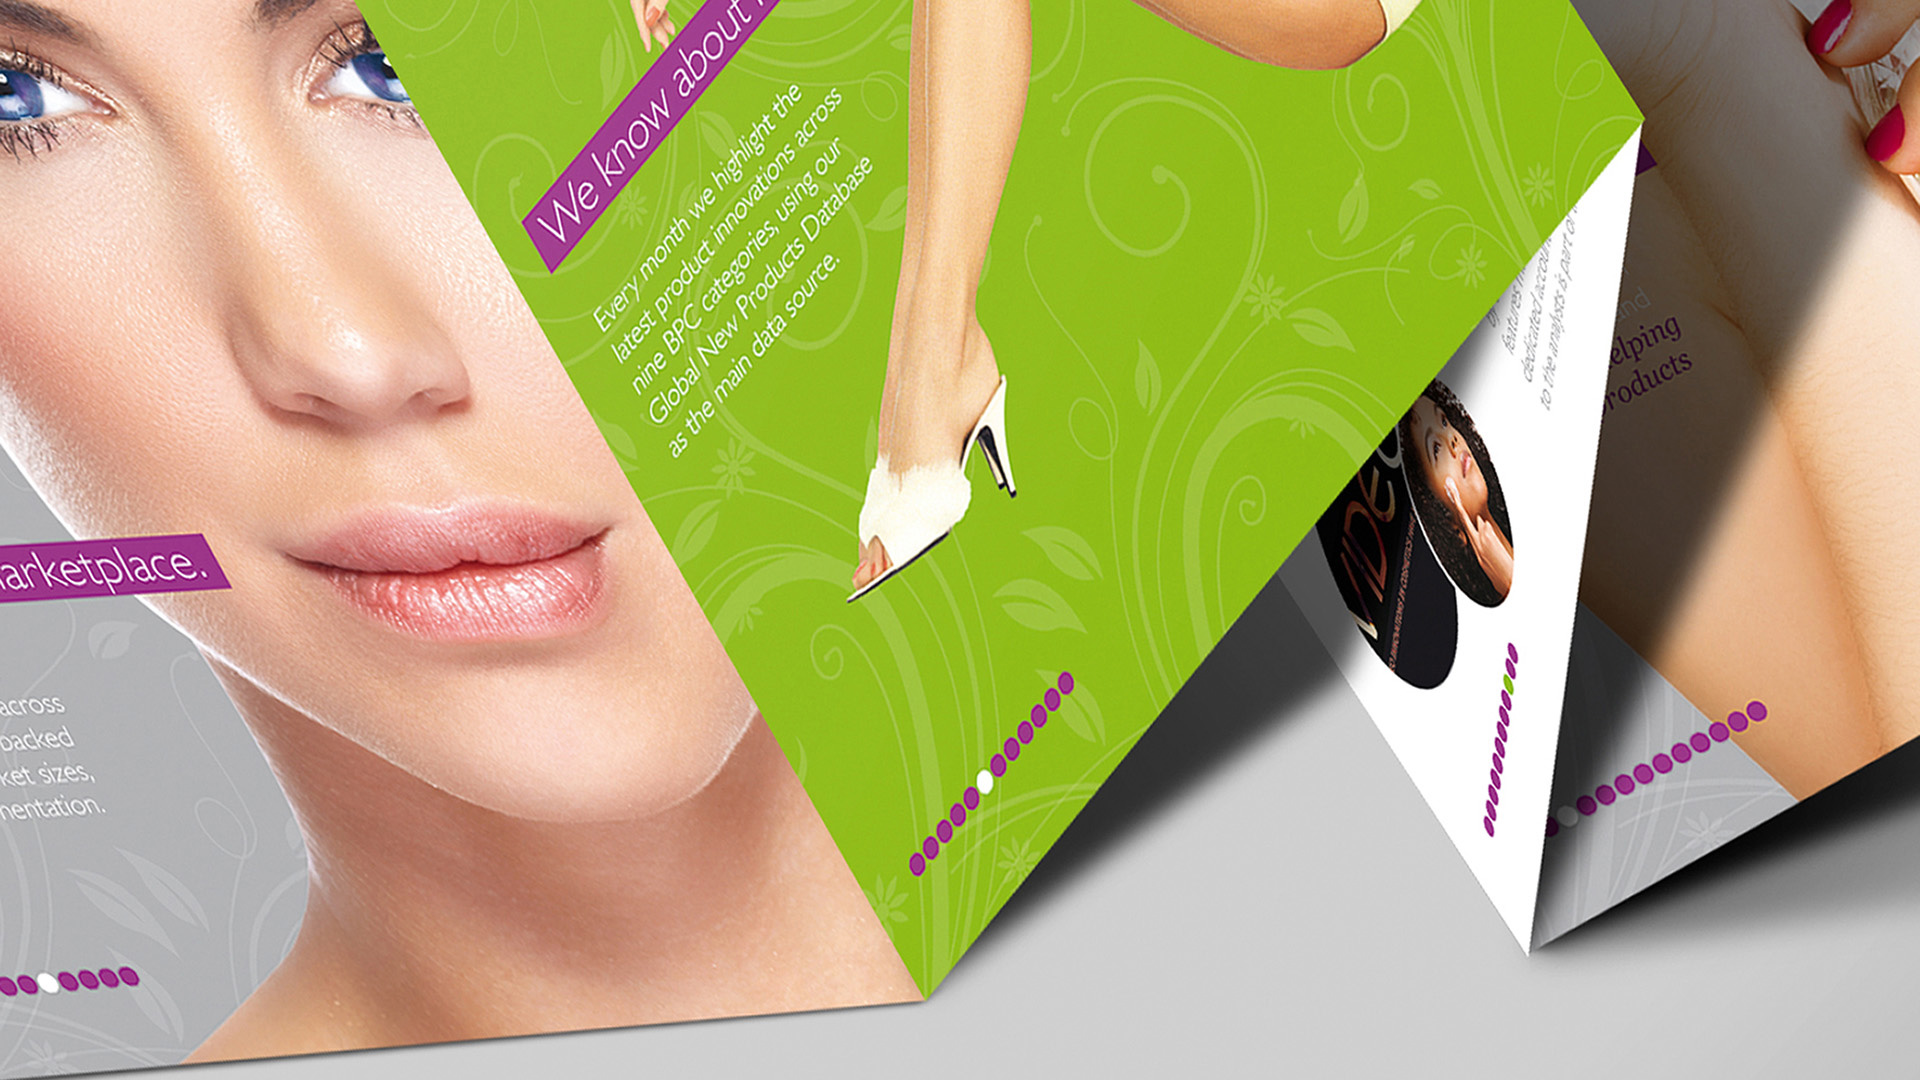 A close-up photograph of a Mintel Beauty Market Brochure on a smooth grey surface